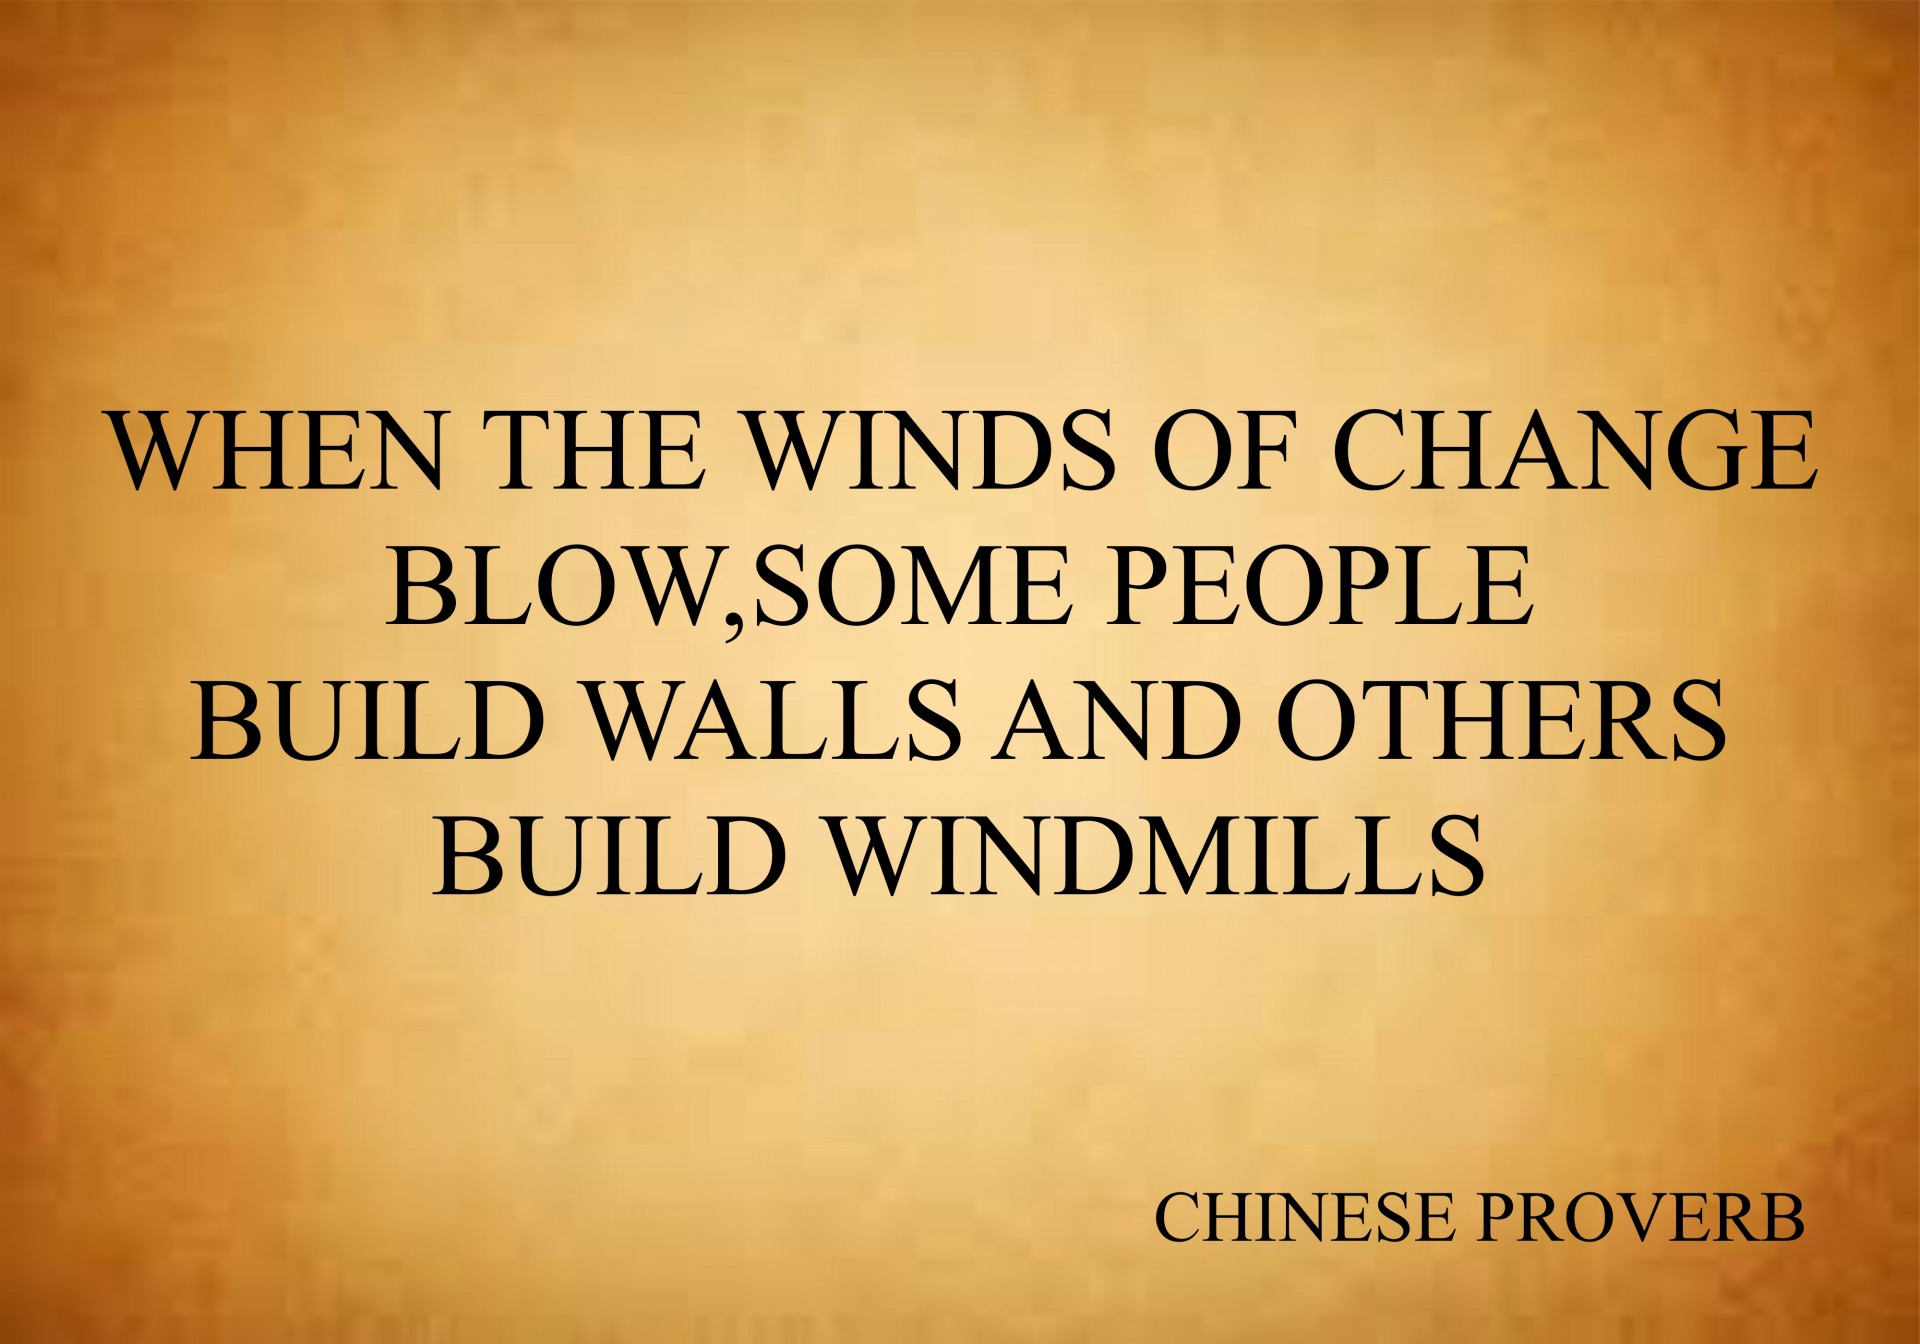 Chinese Proverb On Windmill